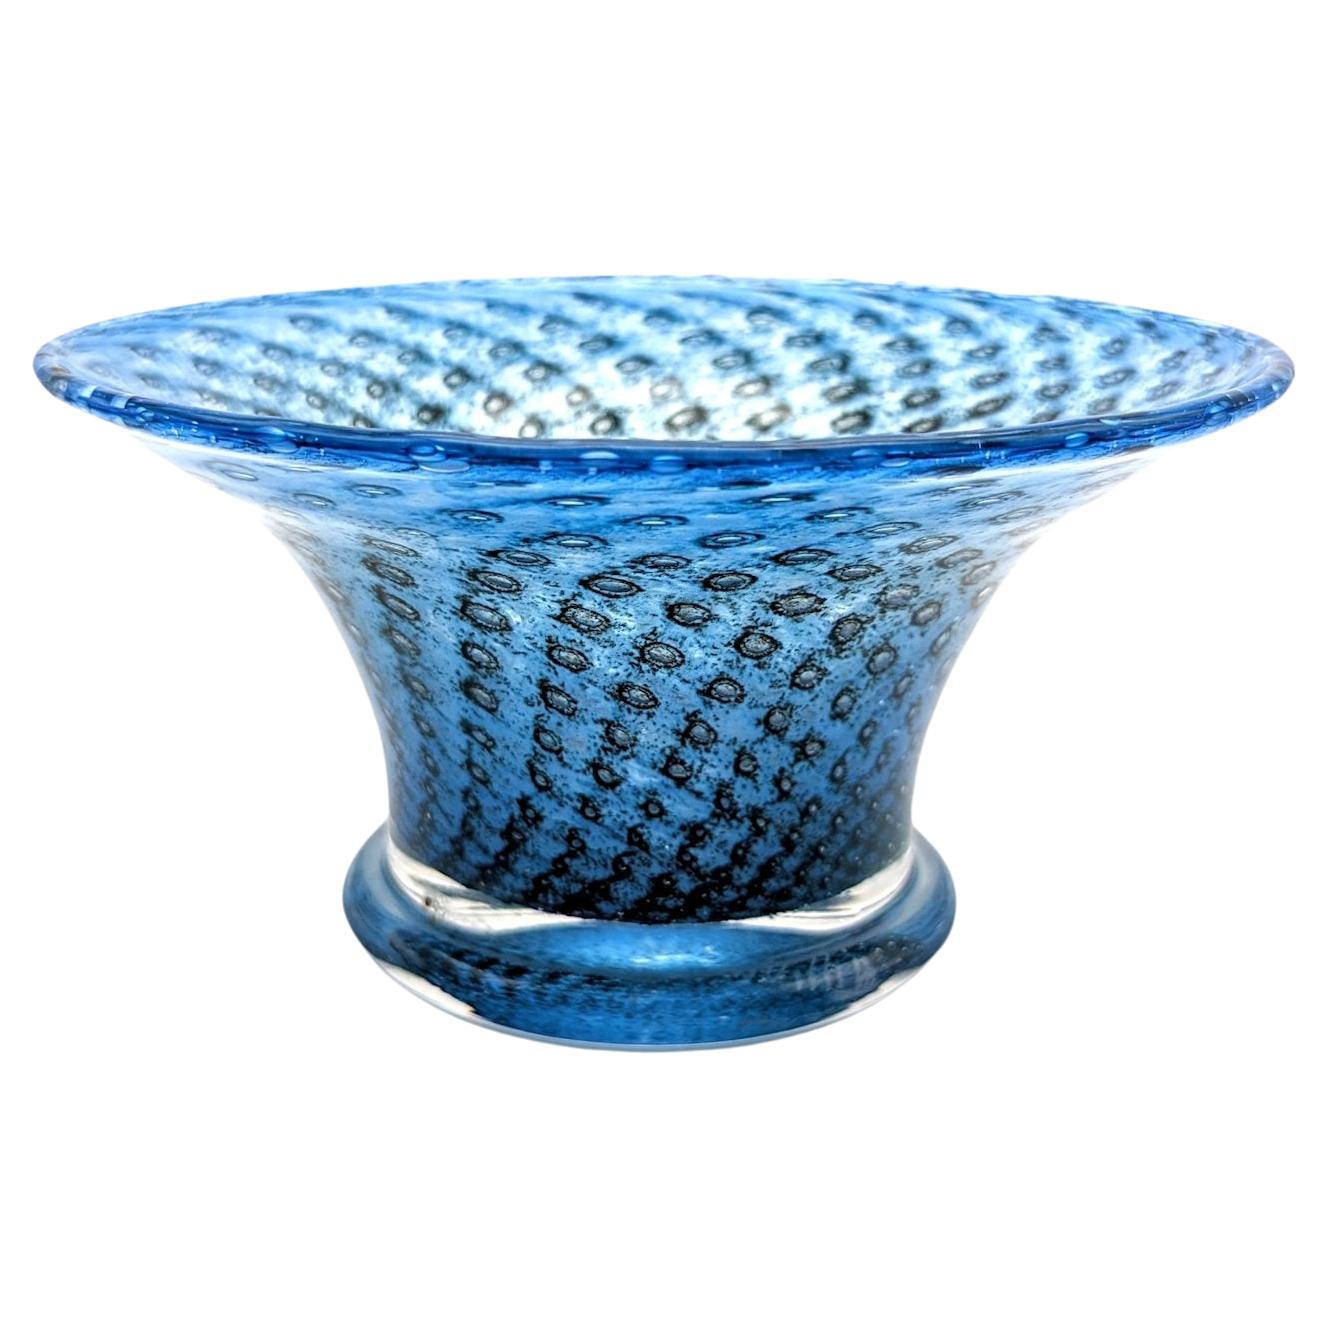 A footed bowl by Bertil Vallien for Boda with controlled bubble decor